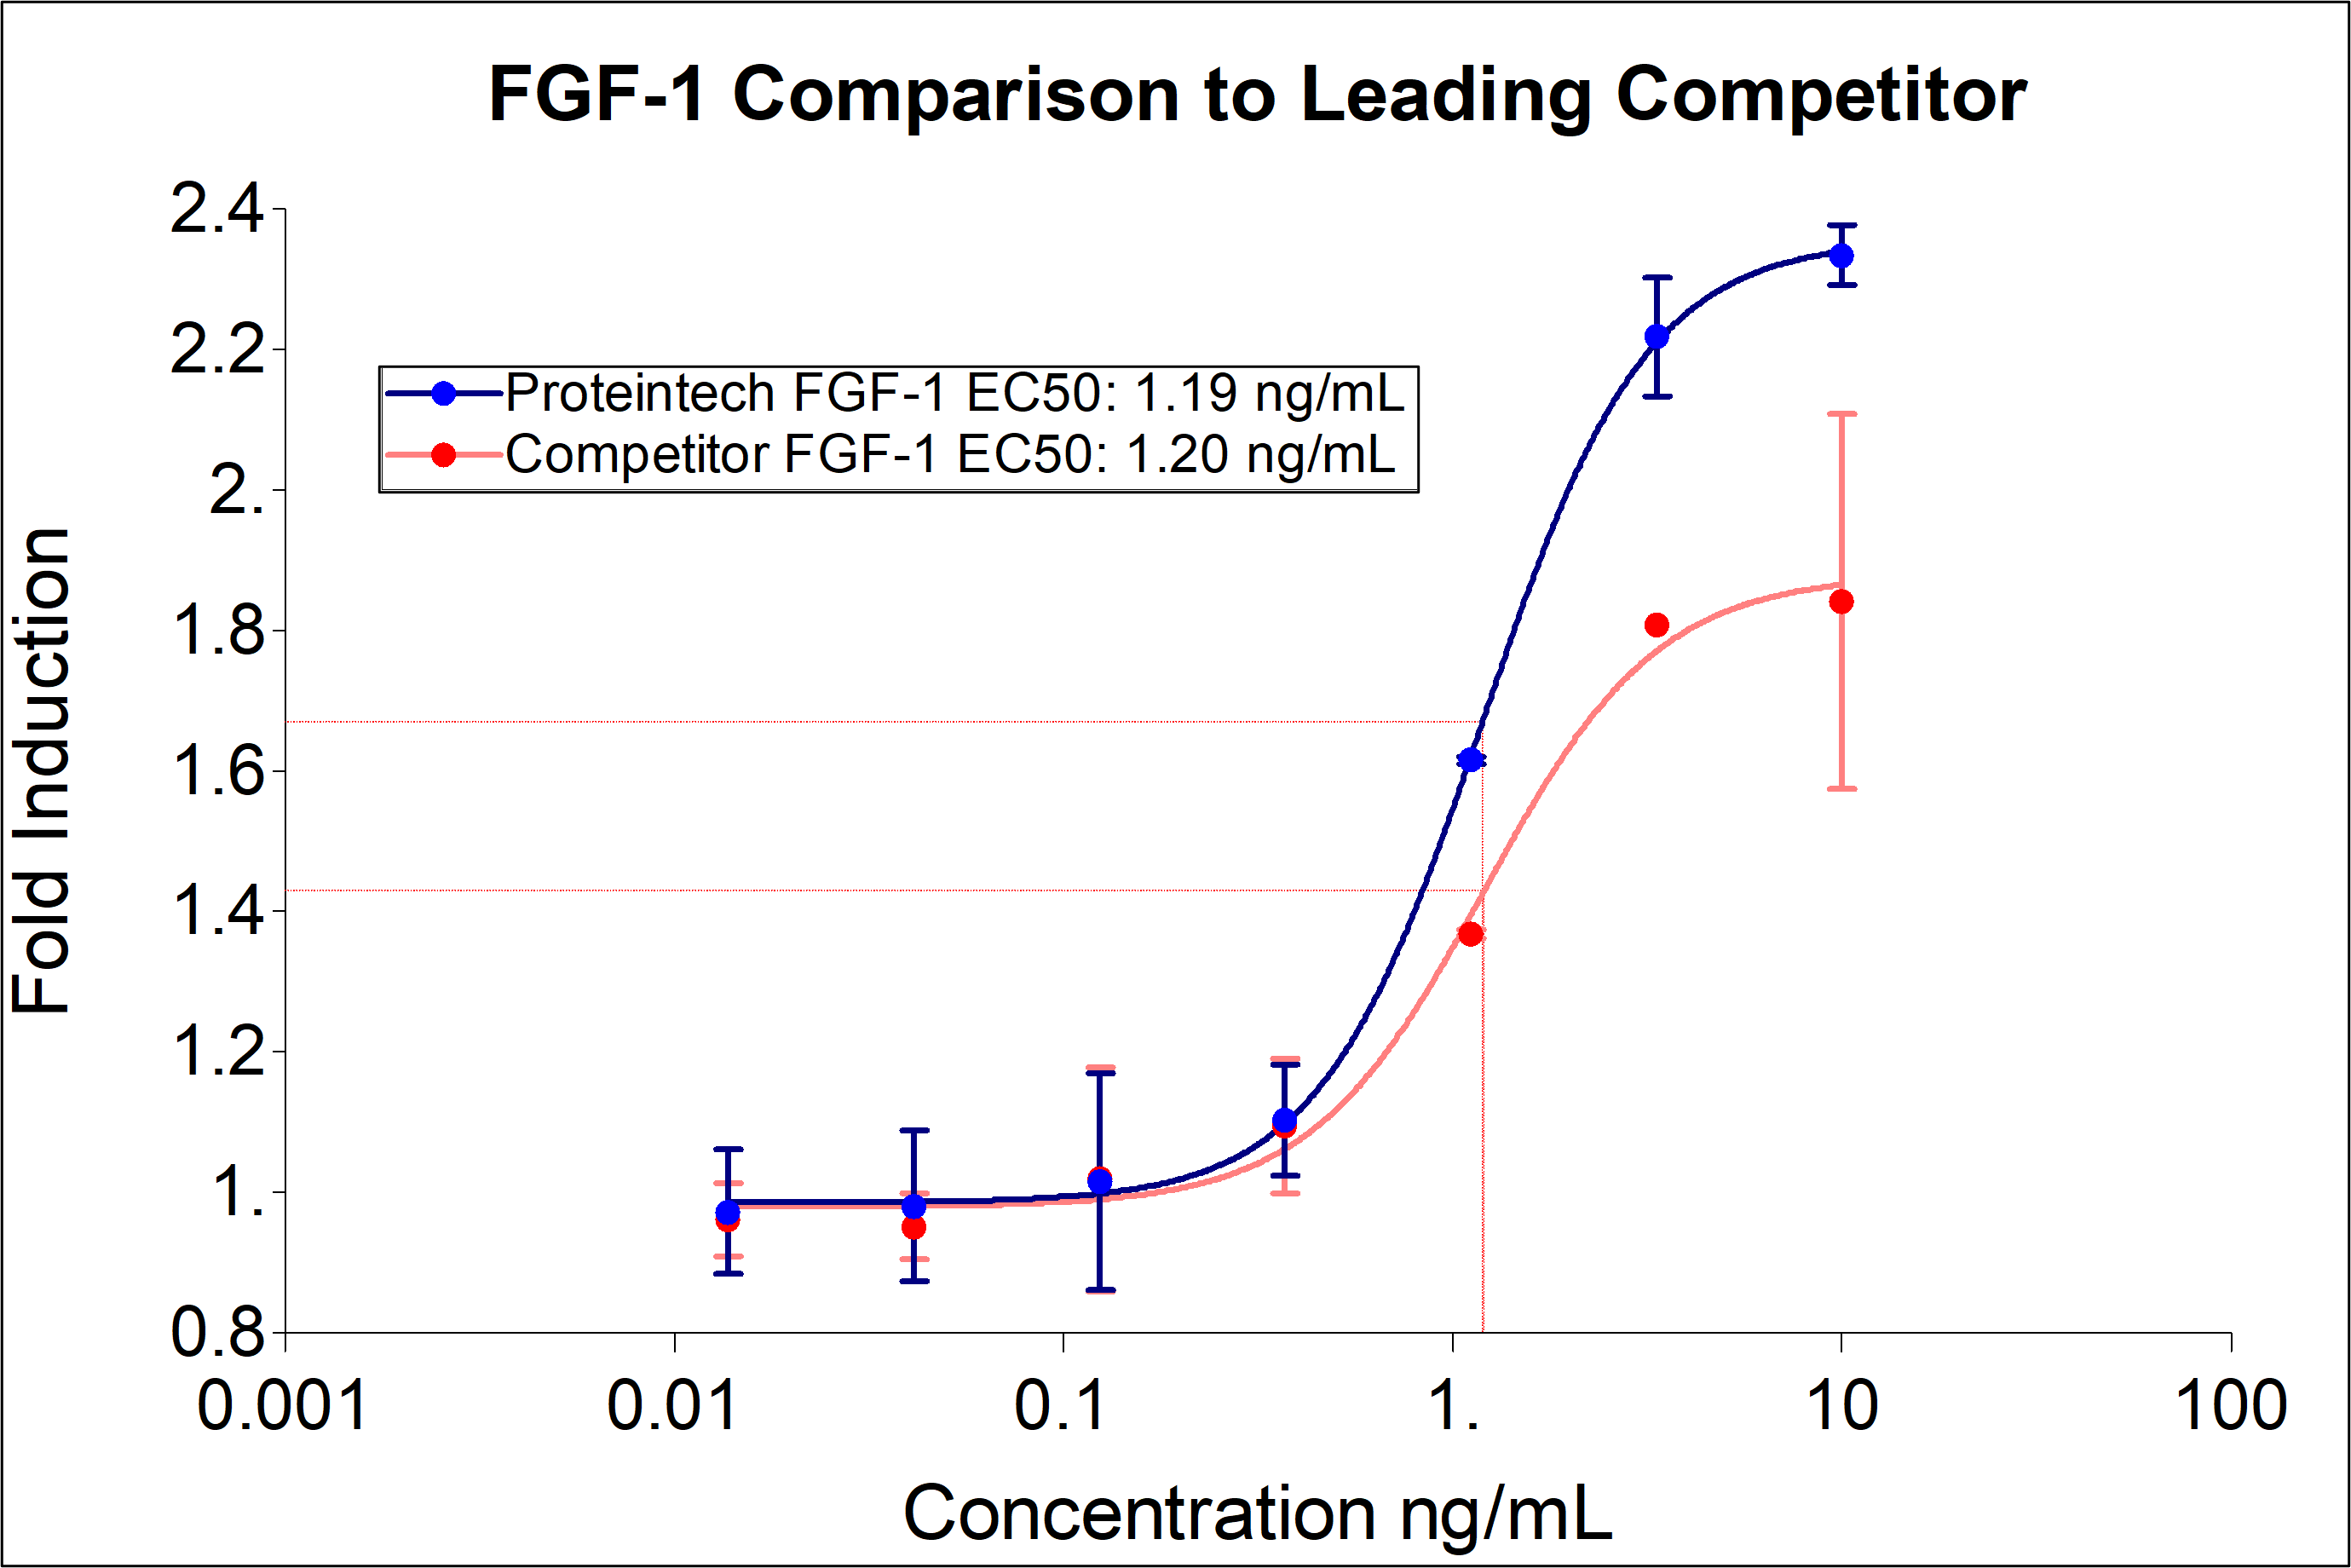 Proteintech FGF-1 demonstrates greater induction of proliferation and equivalent EC50 to leading competitors. Recombinant human FGF-1 (HZ-1327) stimulates dose-dependent proliferation of the HDFa human primary fibroblast cell line. Cell number was quantitatively assessed by Promega CellTiter 96® cell viability reagent. HDFa cells were treated with increasing concentrations of recombinant FGFbasic-TS from either a leading competitor or Proteintech for 48 hours. 